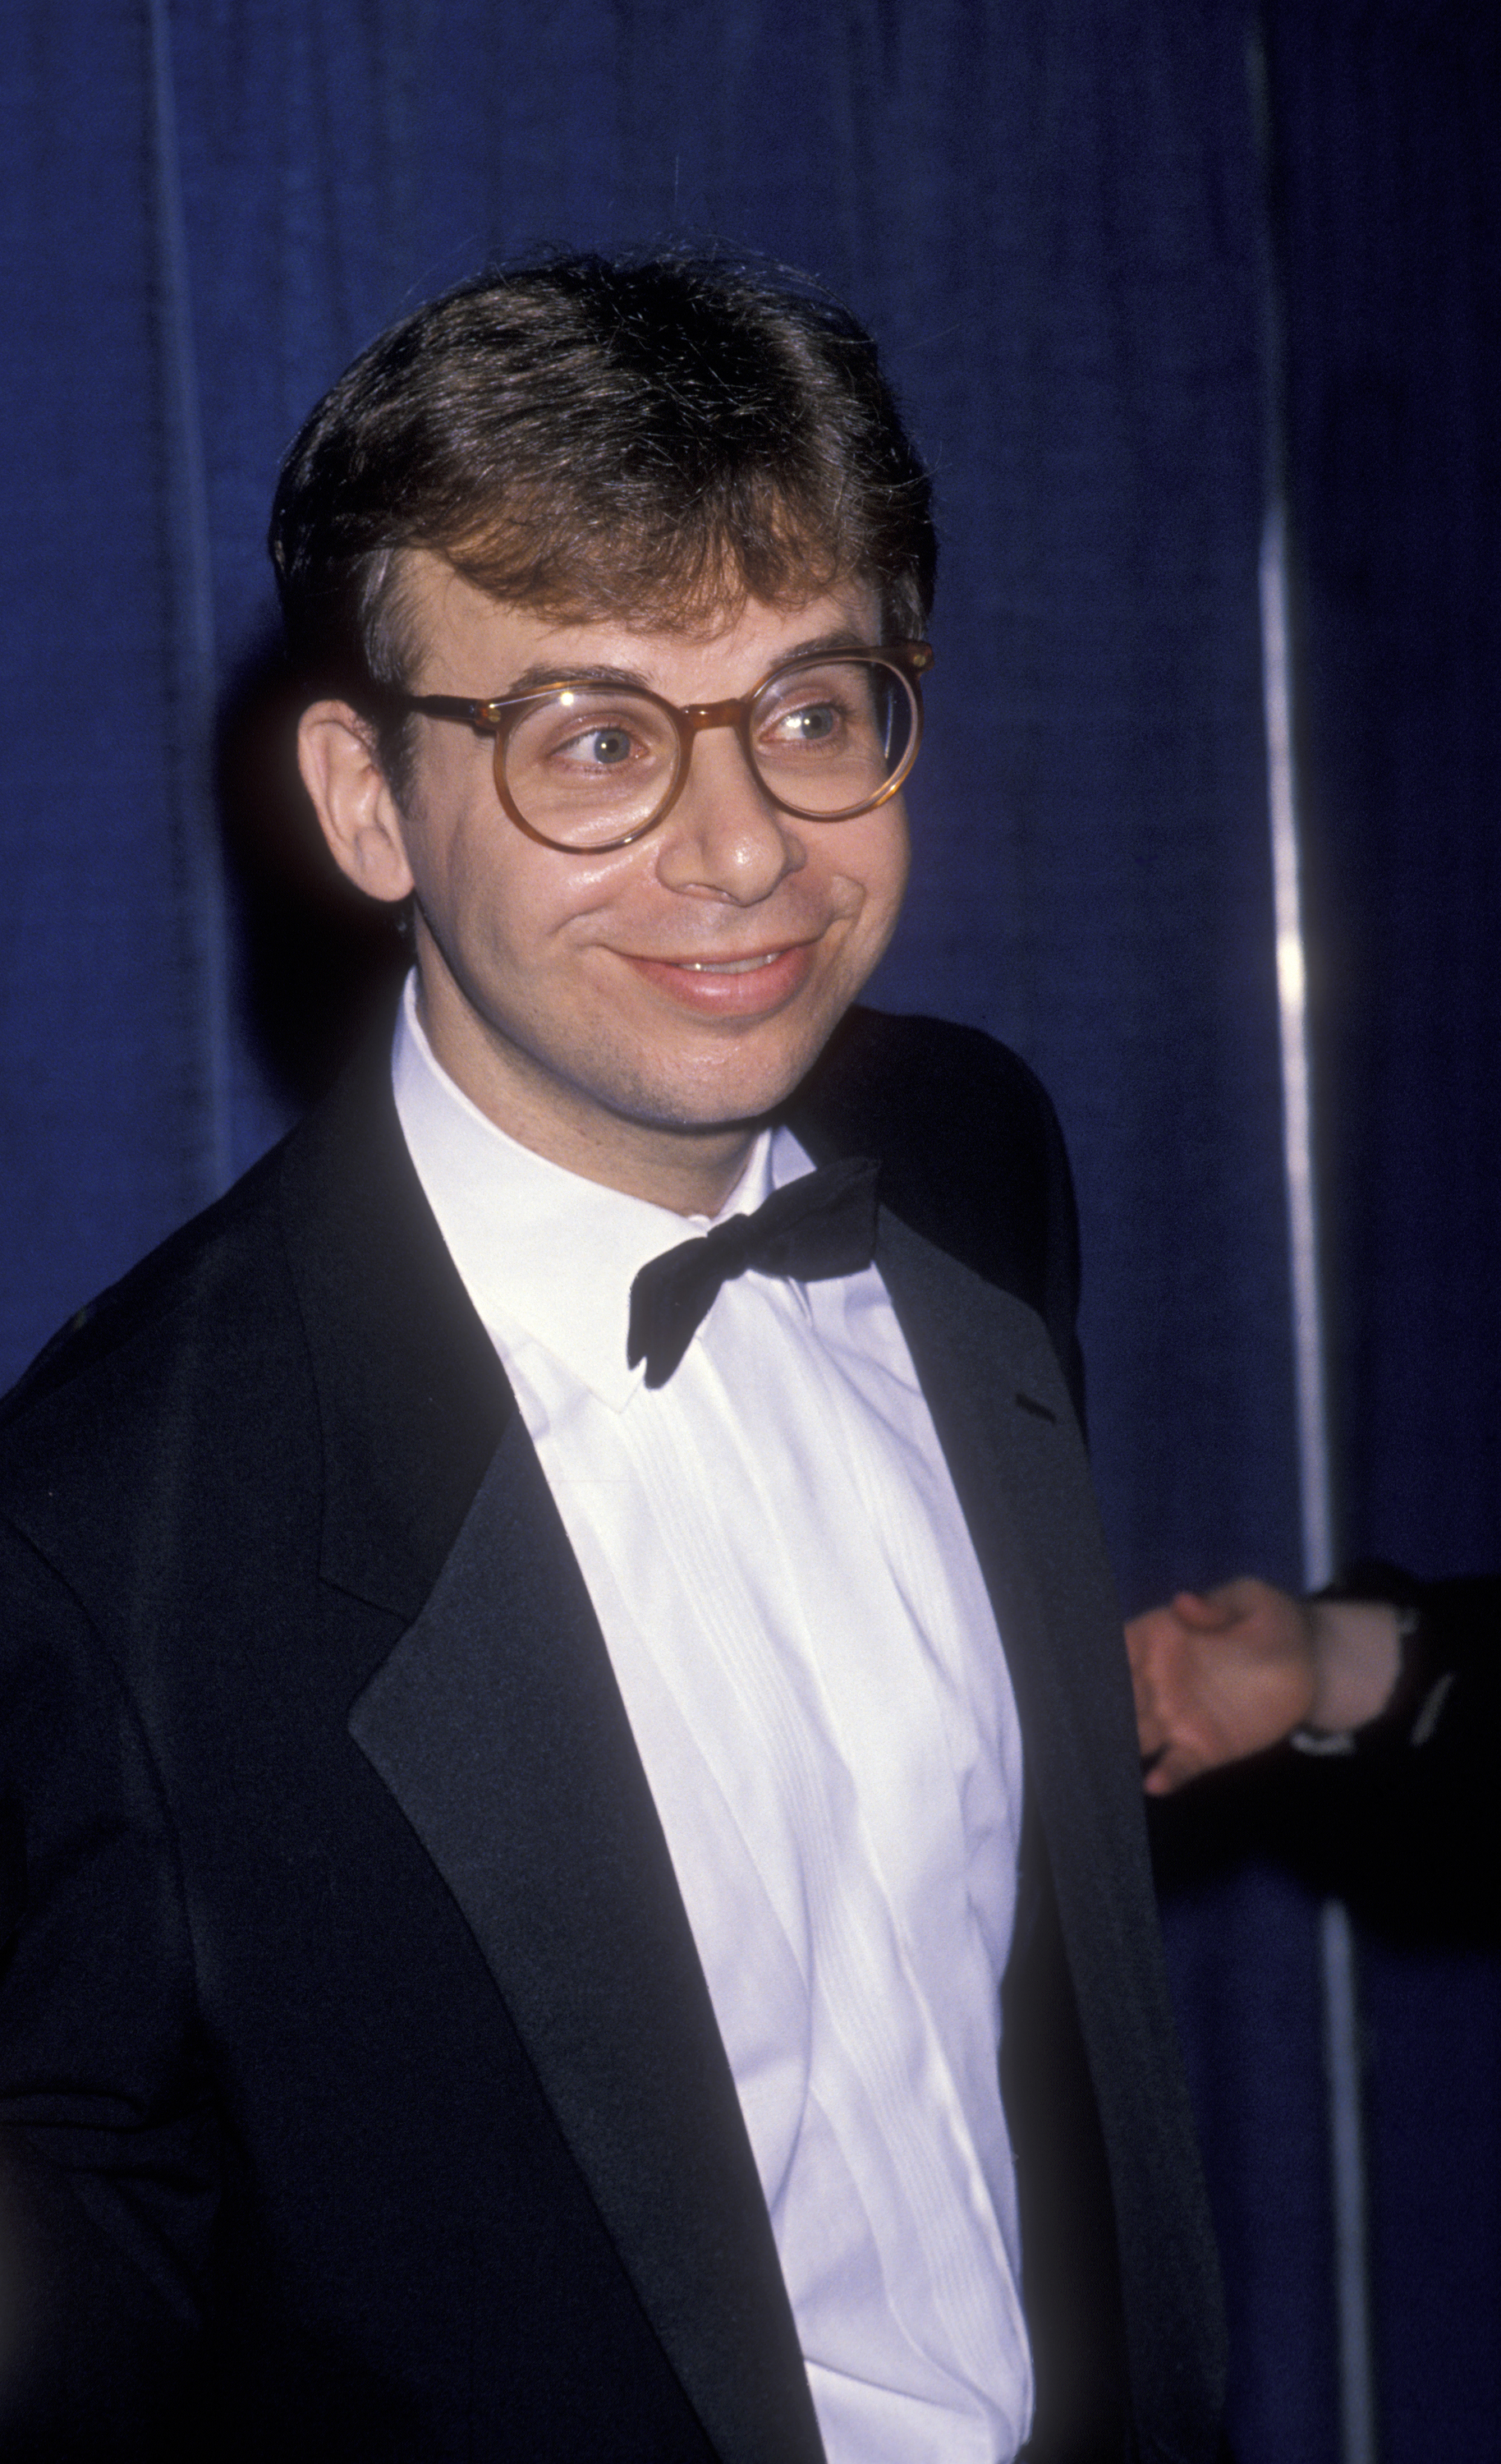 Rick Moranis at the Fourth Annual Comedy Awards on March 10, 1990 in Los Angeles, California. | Source: Getty Images